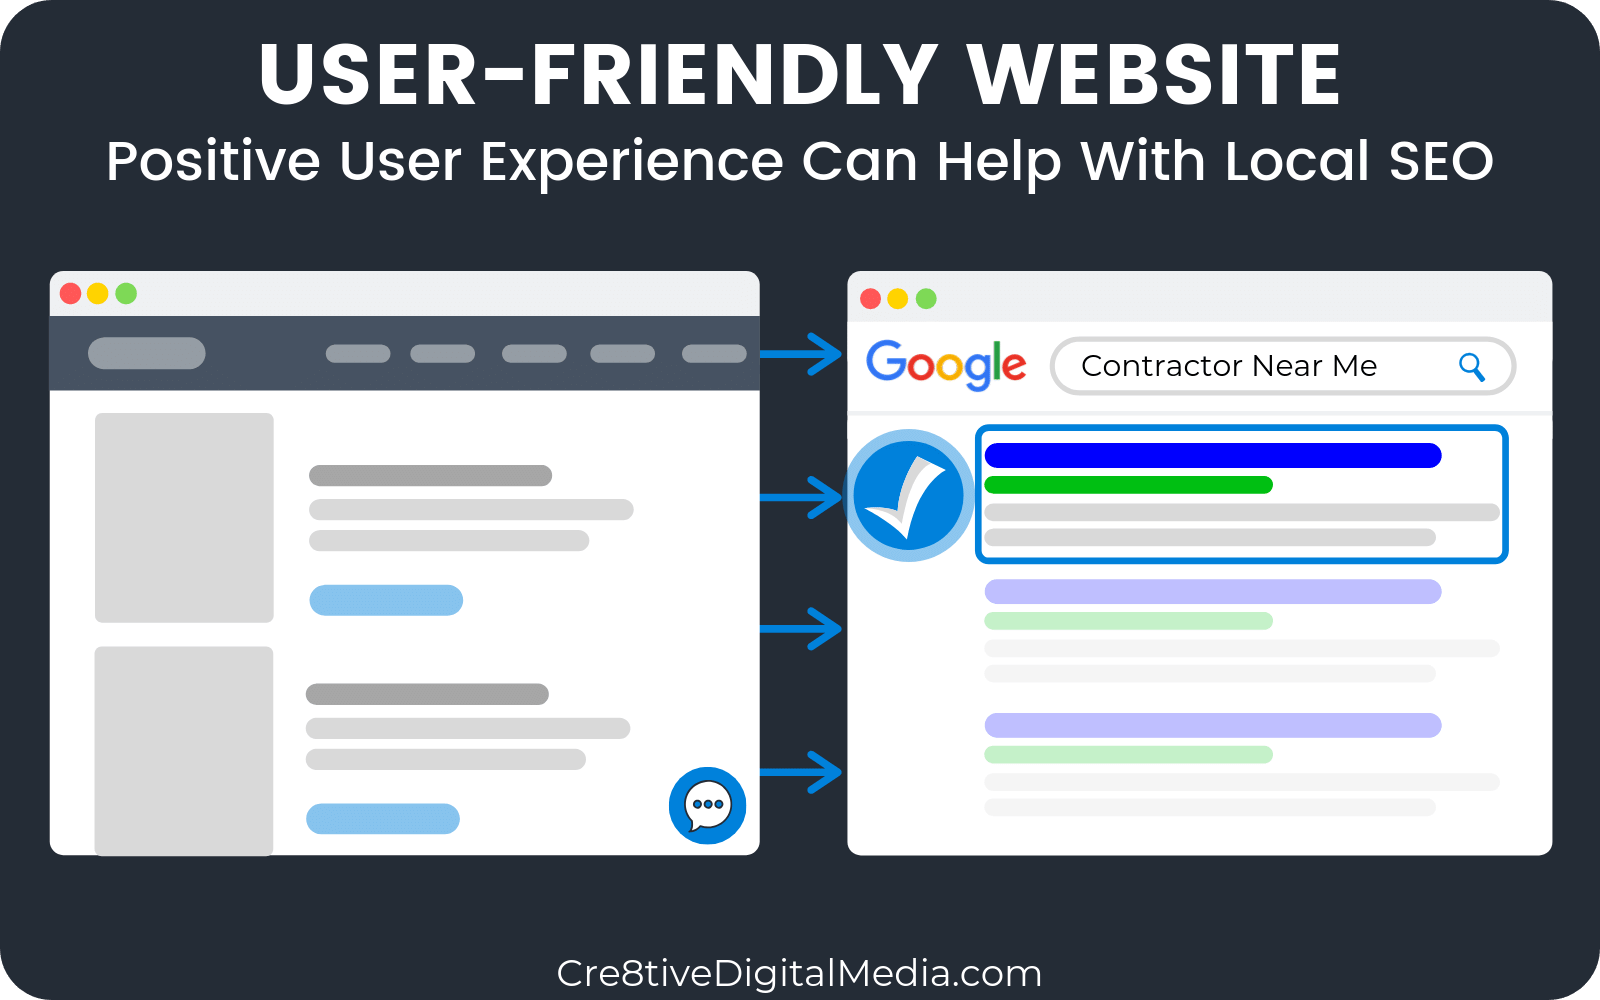 User-Friendly Website Can Help With Local SEO